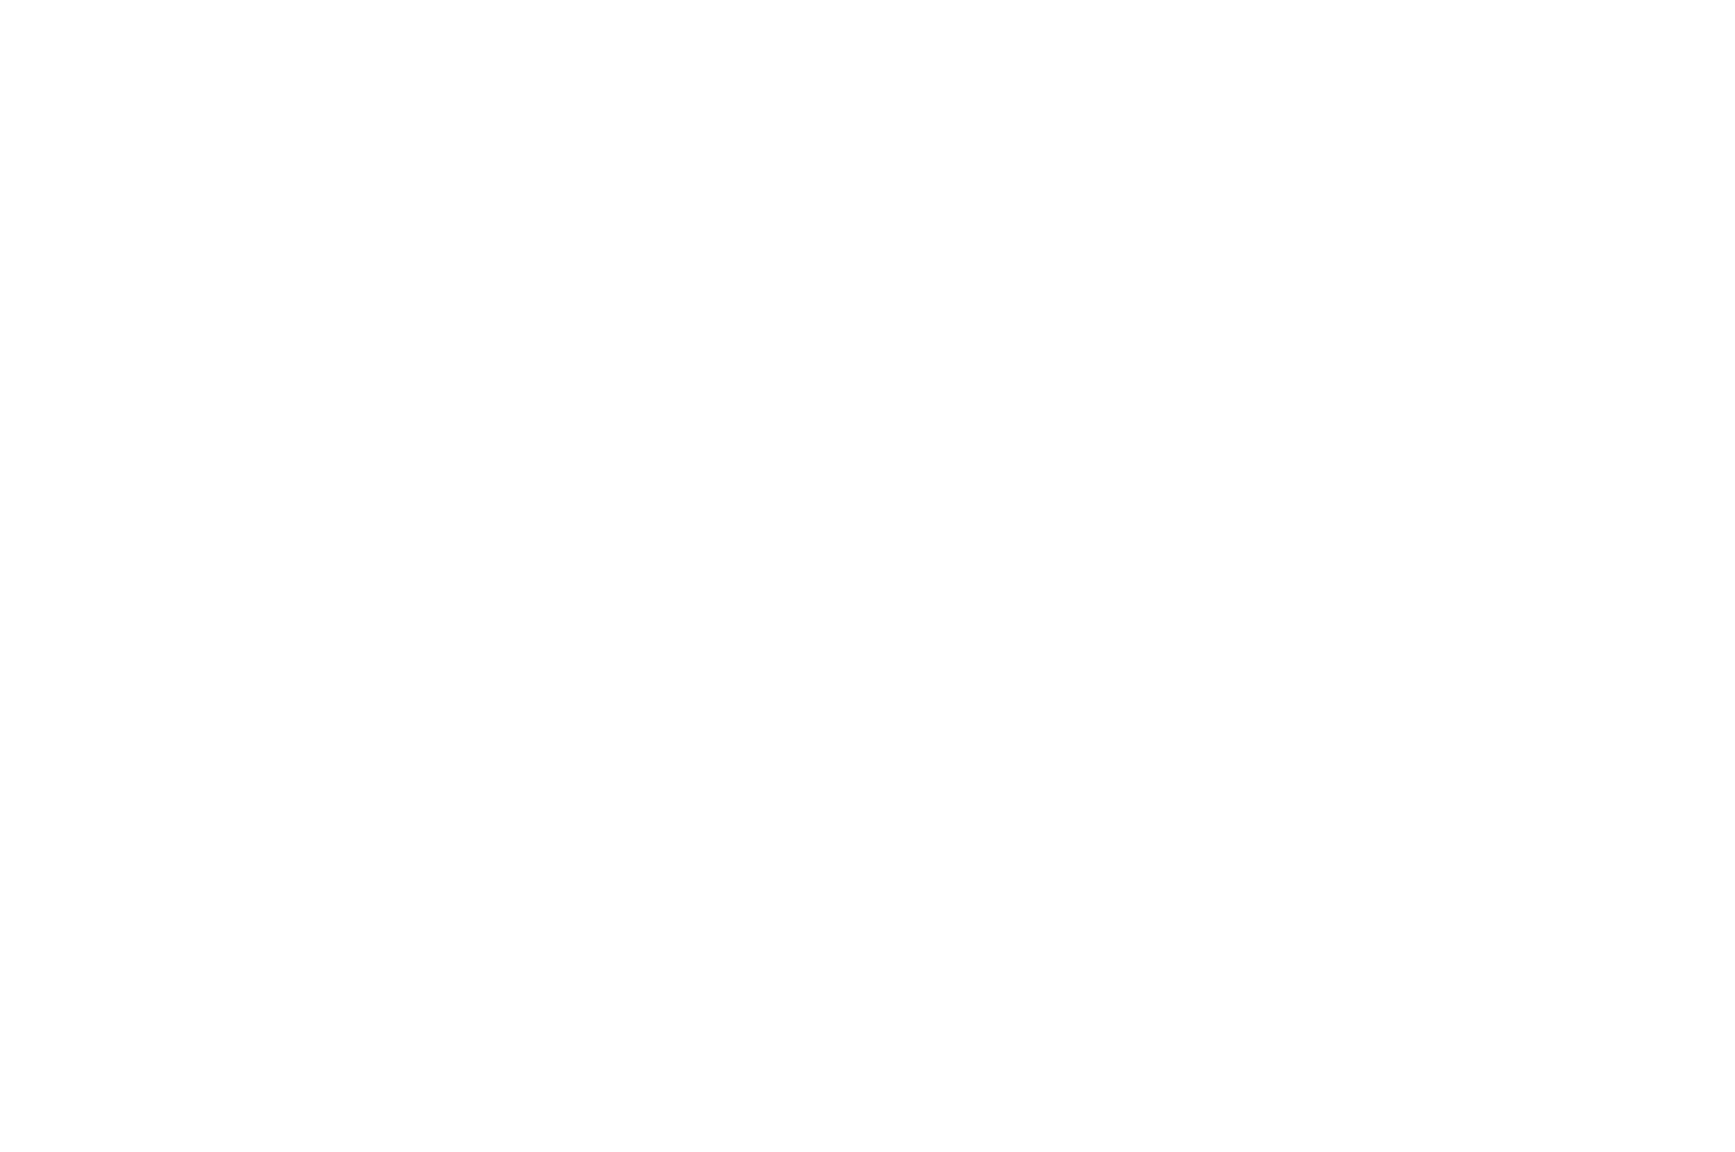 OFFICIAL SELECTION - Door Kinetic Arts Festival - 2022